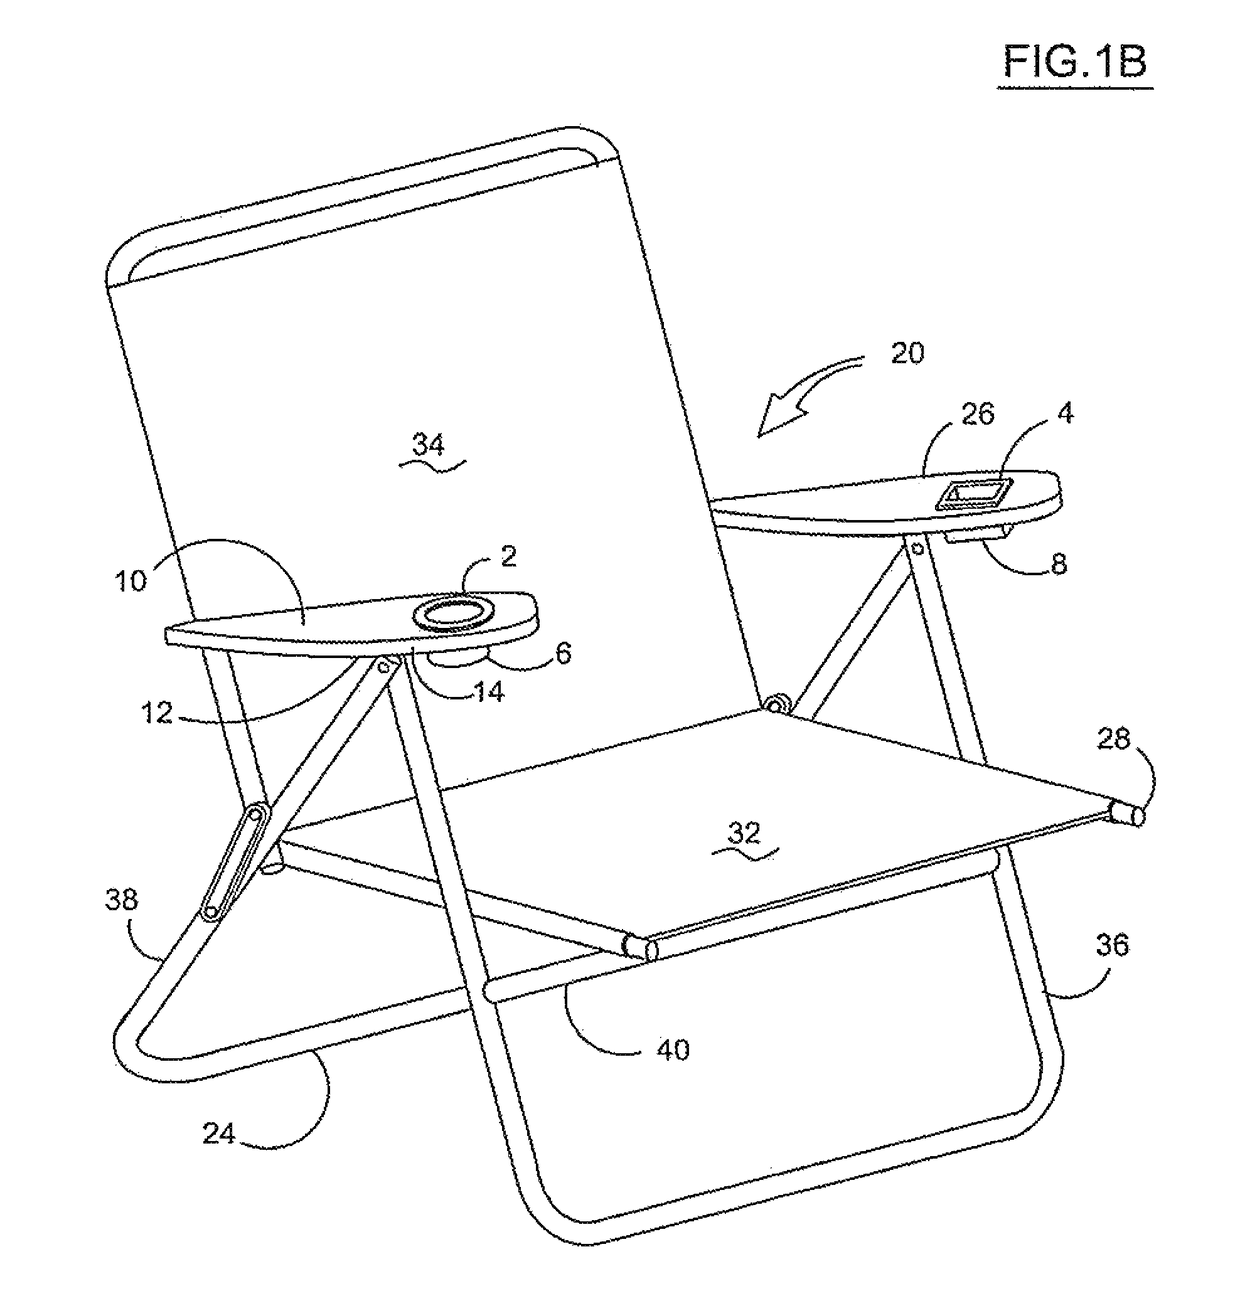 Collapsible cup or cell phone holder for chair arm